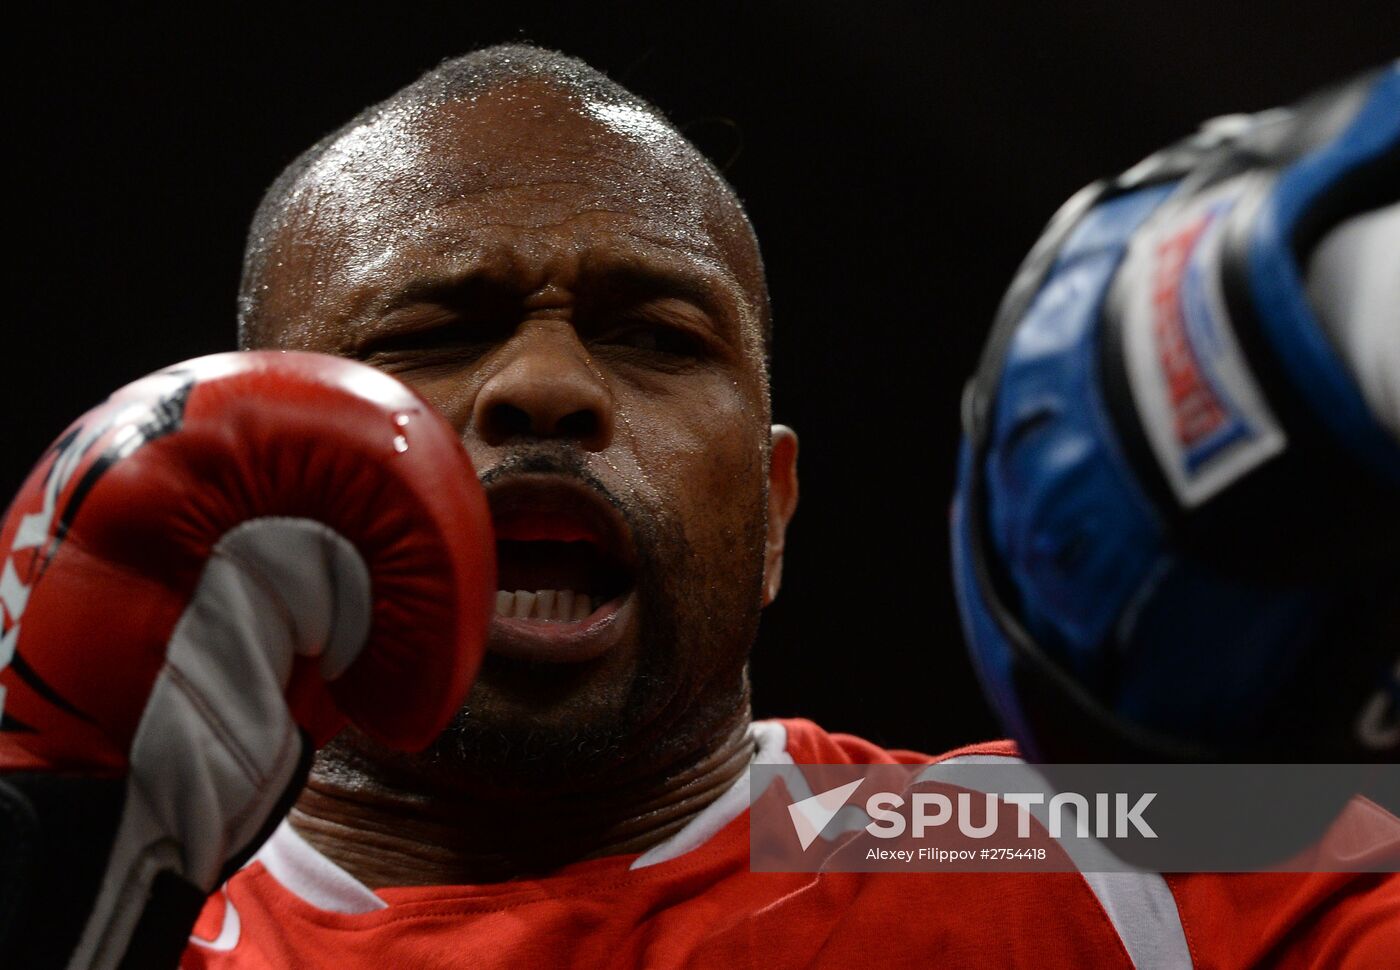 Boxing. Training by Enzo Maccarinelli and Roy Jones Jr.